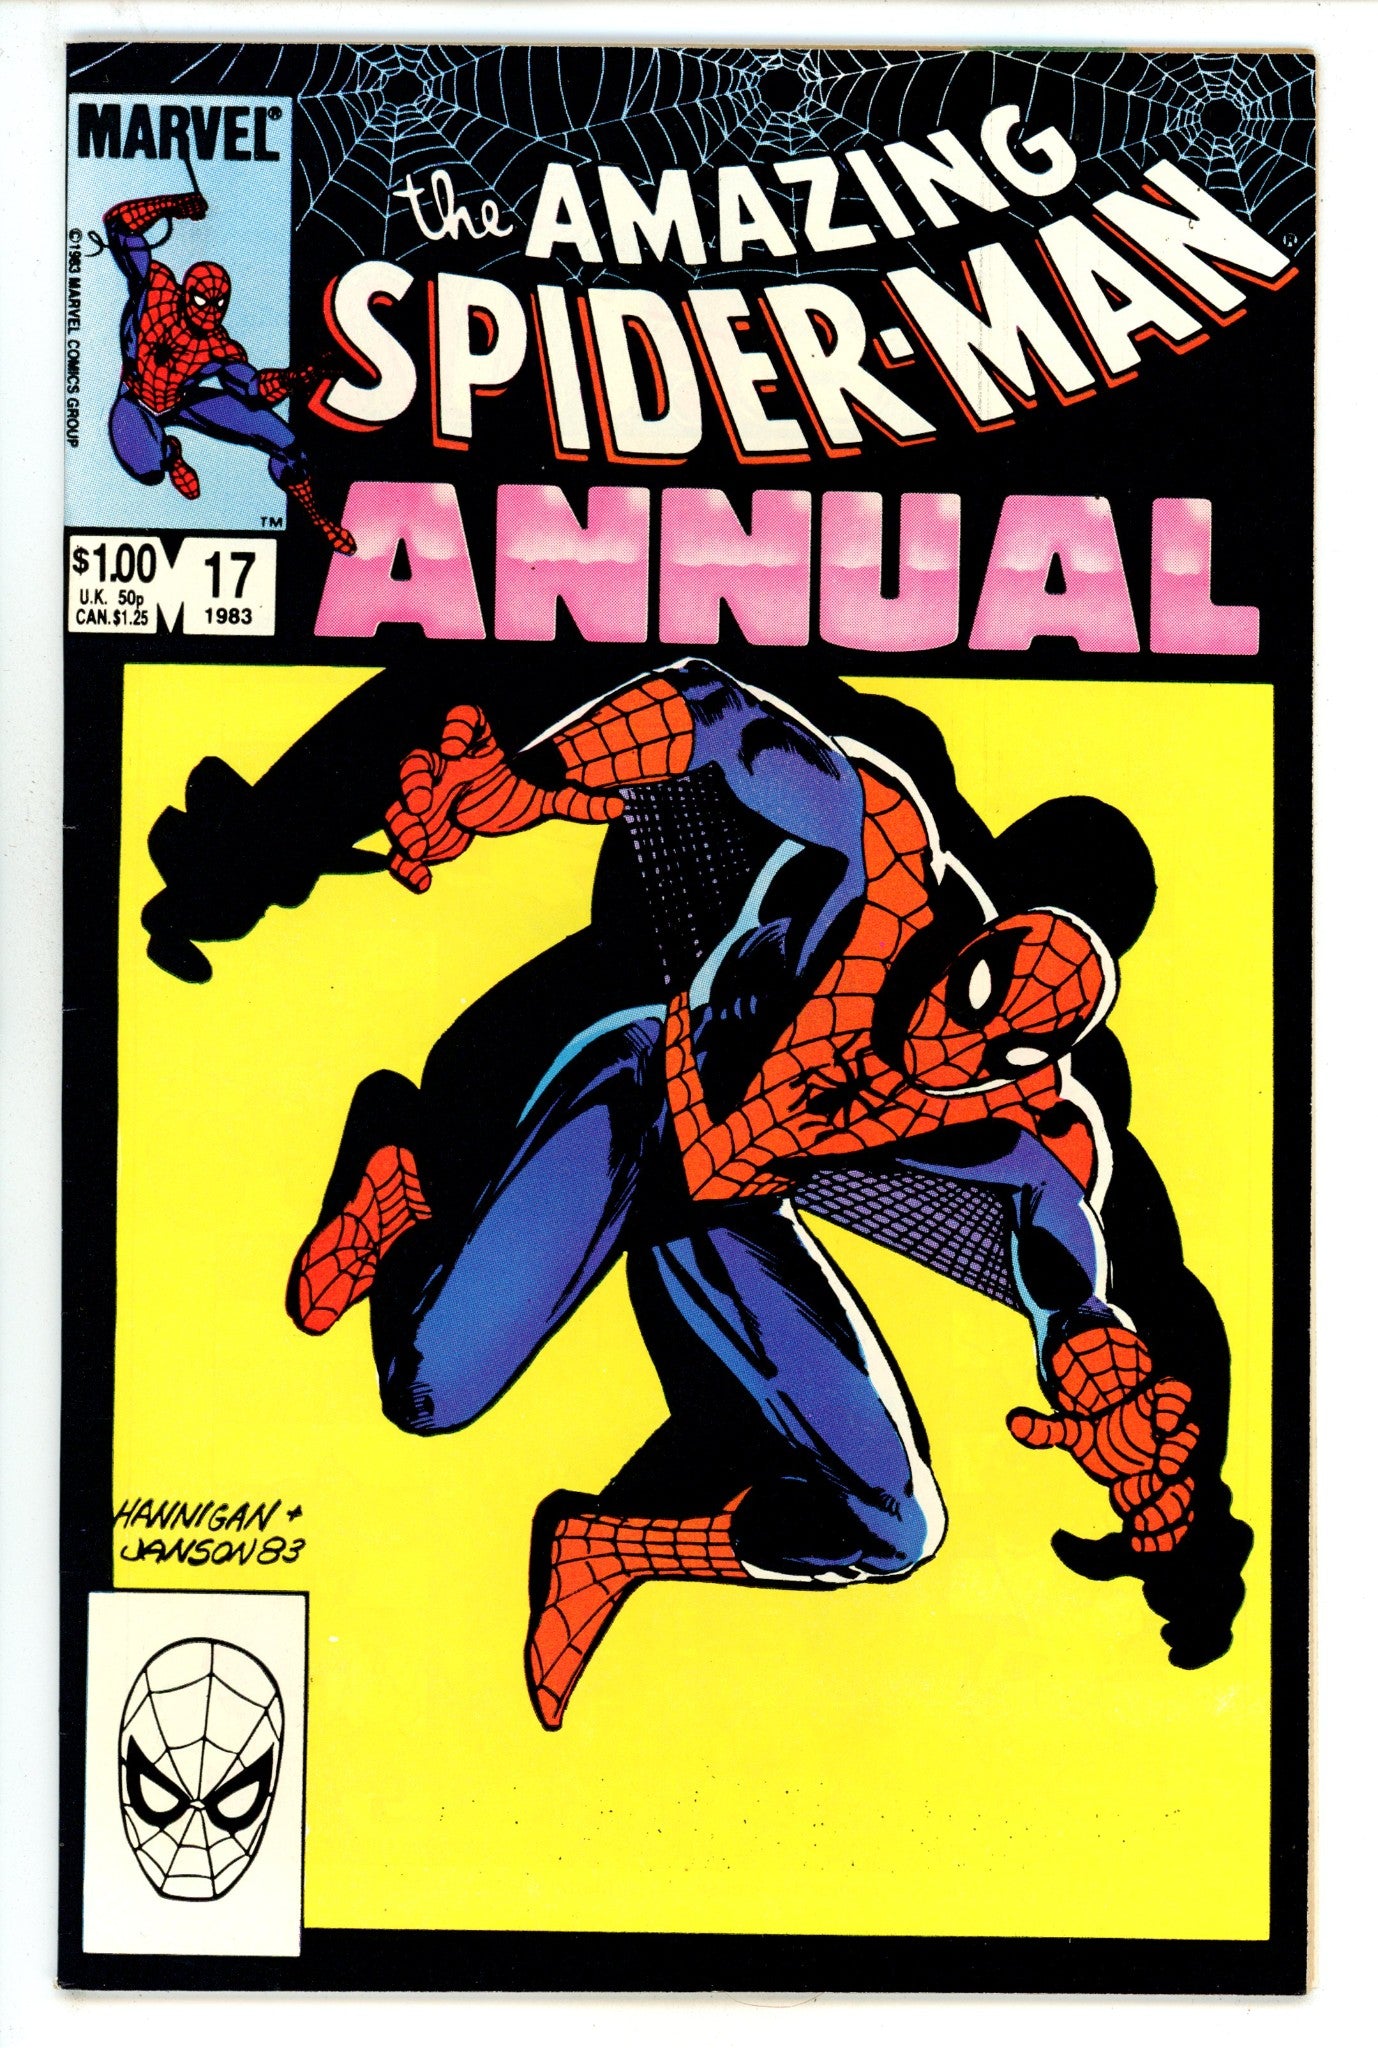 The Amazing Spider-Man Annual Vol 1 17 FN+ (6.5) (1983) 